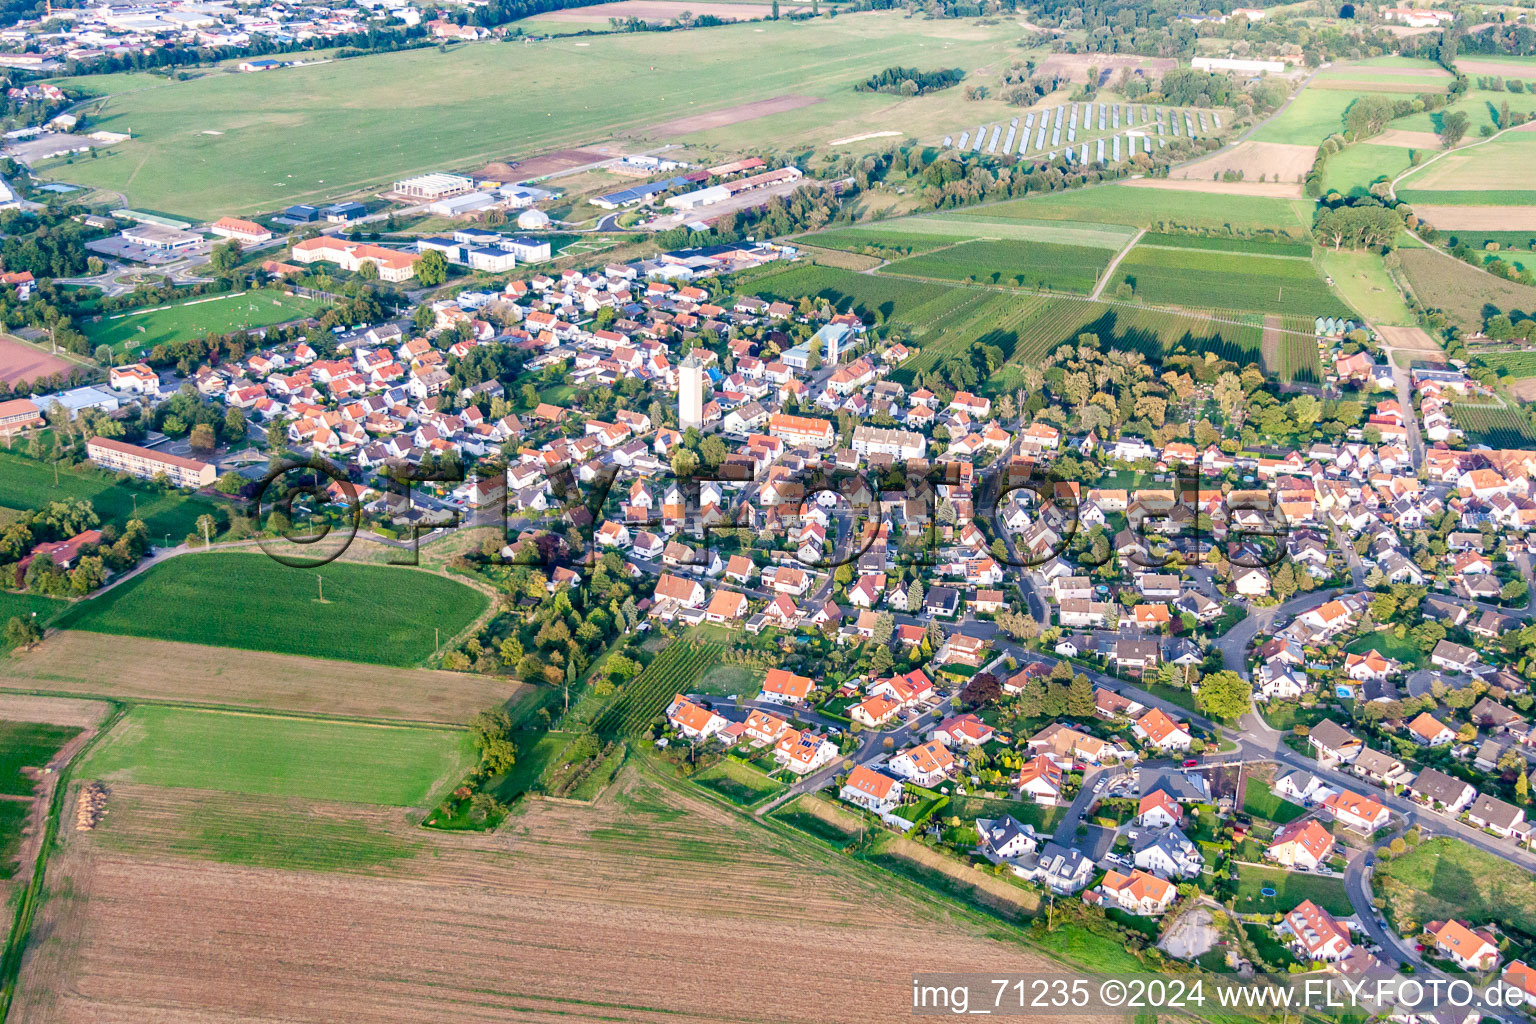 District Lachen in Neustadt an der Weinstraße in the state Rhineland-Palatinate, Germany seen from a drone